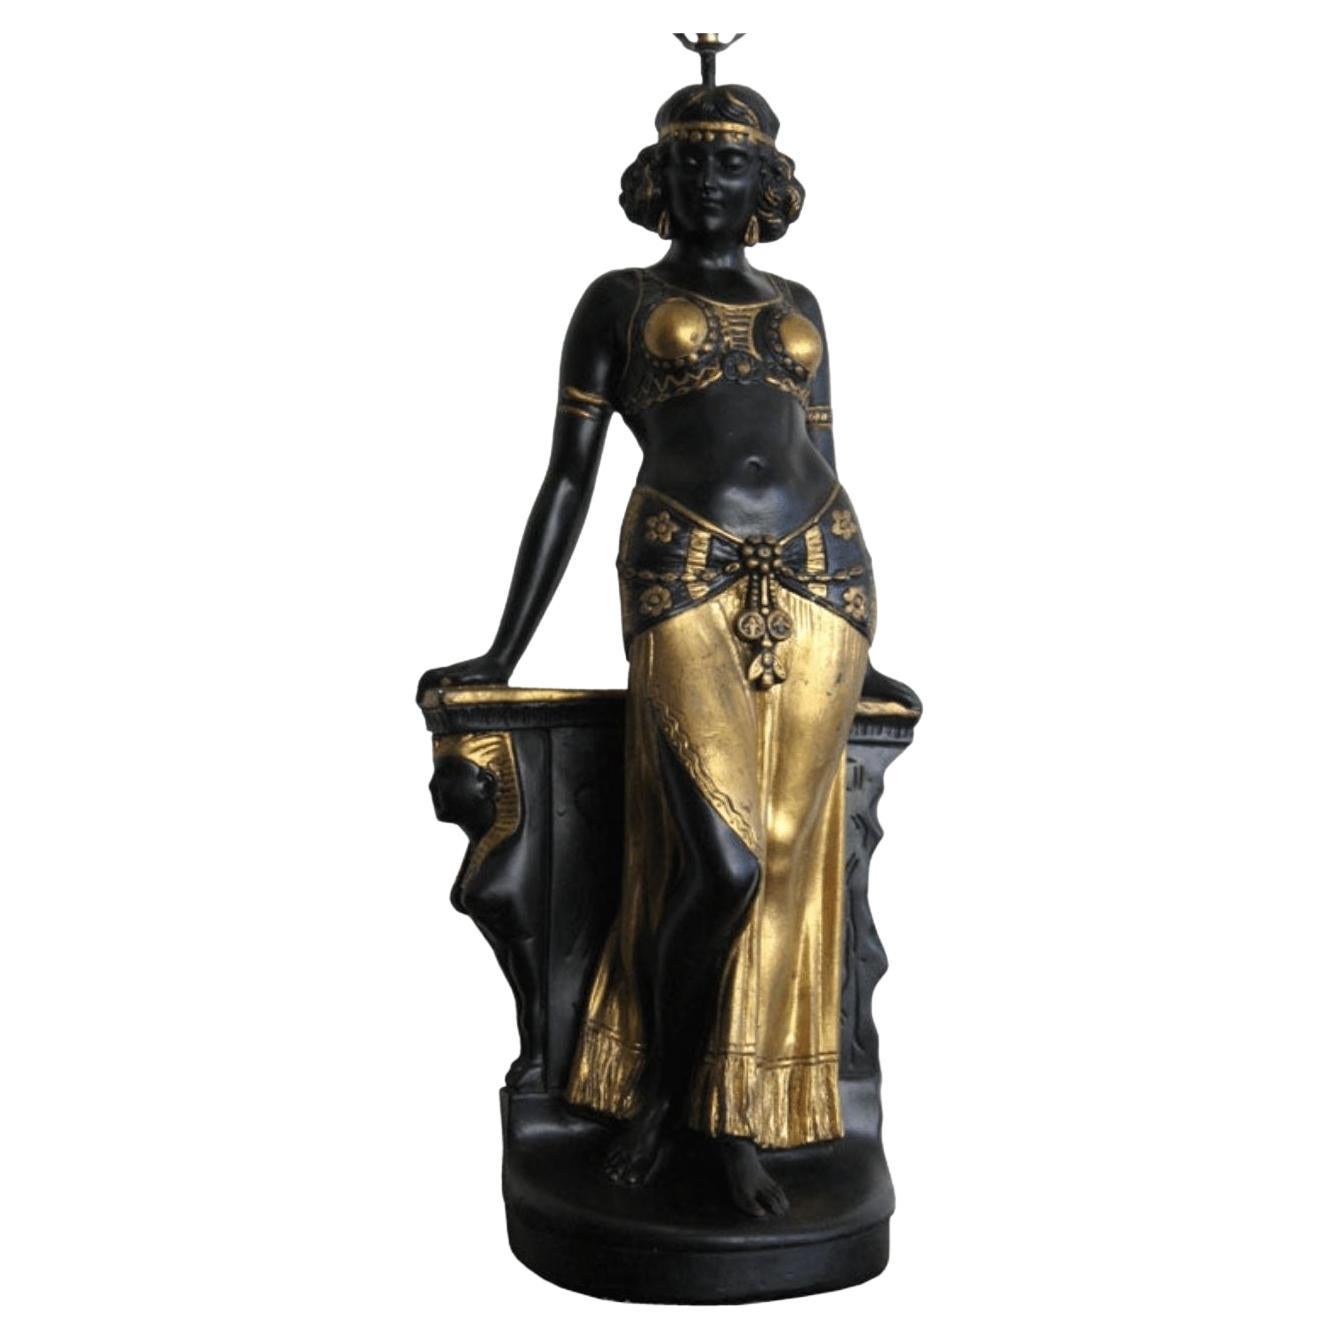 Wonderful Ceramic Table Lamp of an Egyptian Female For Sale